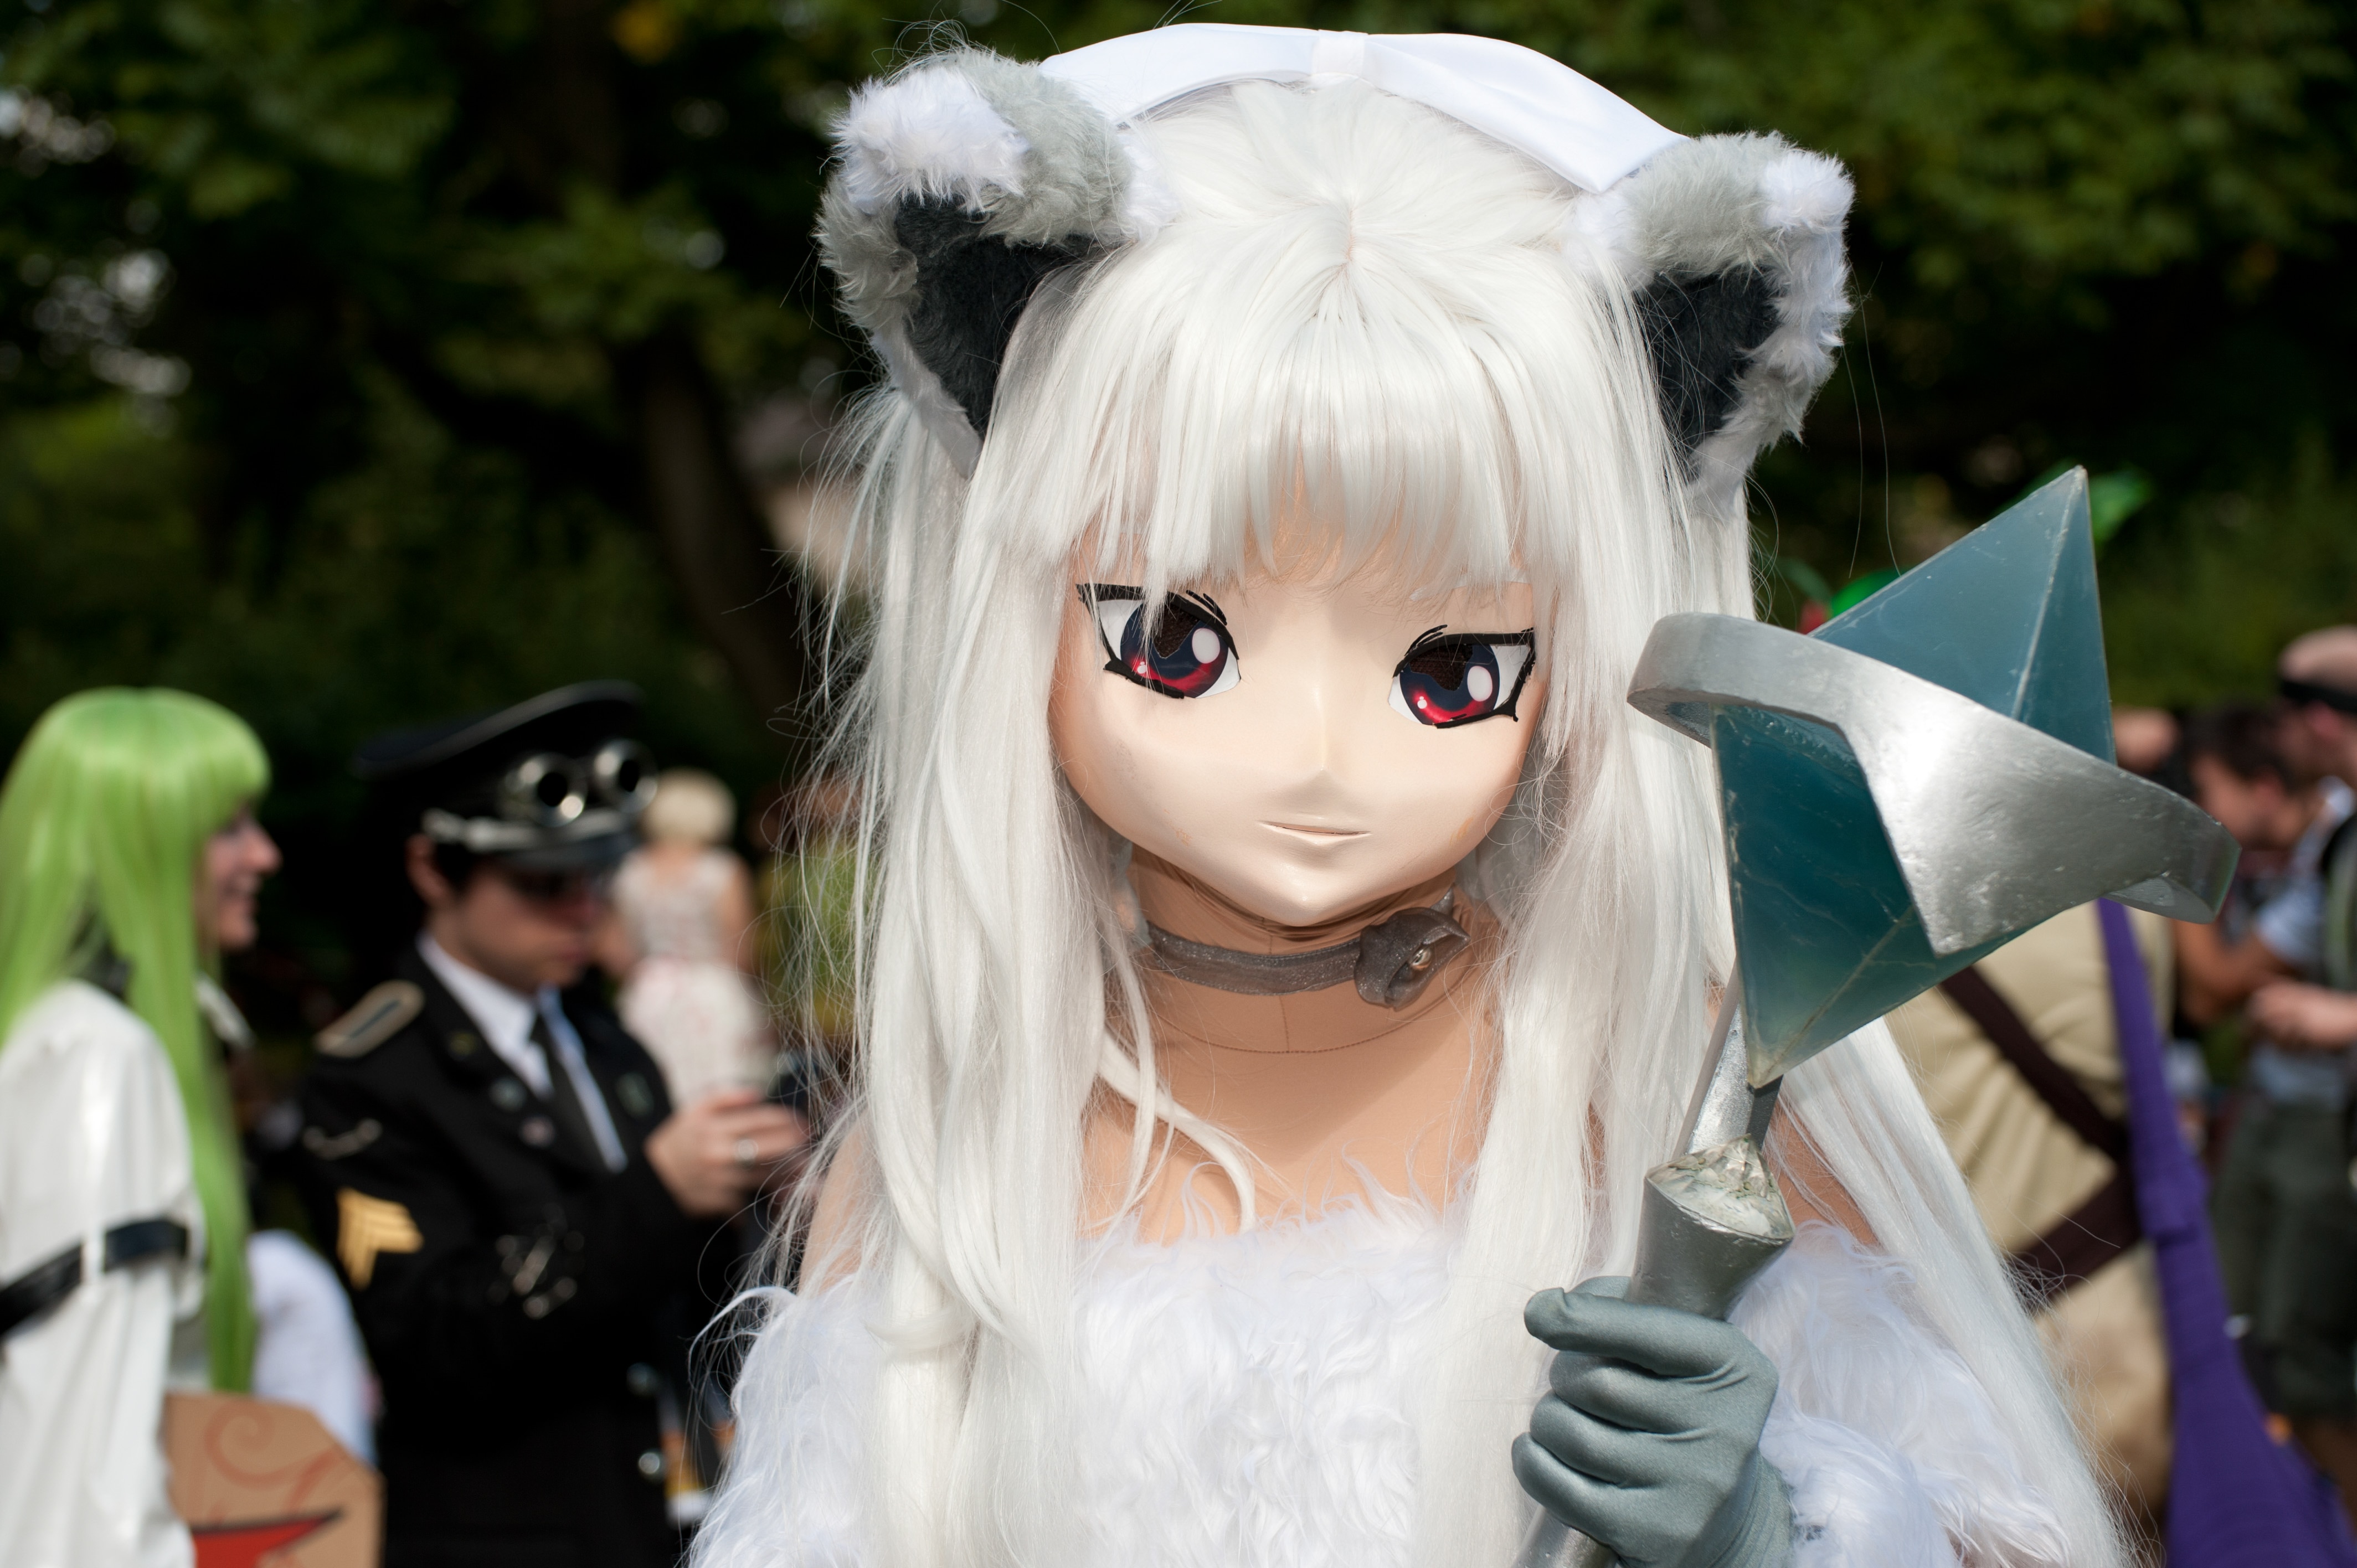 woman in anime costume during daytime photo